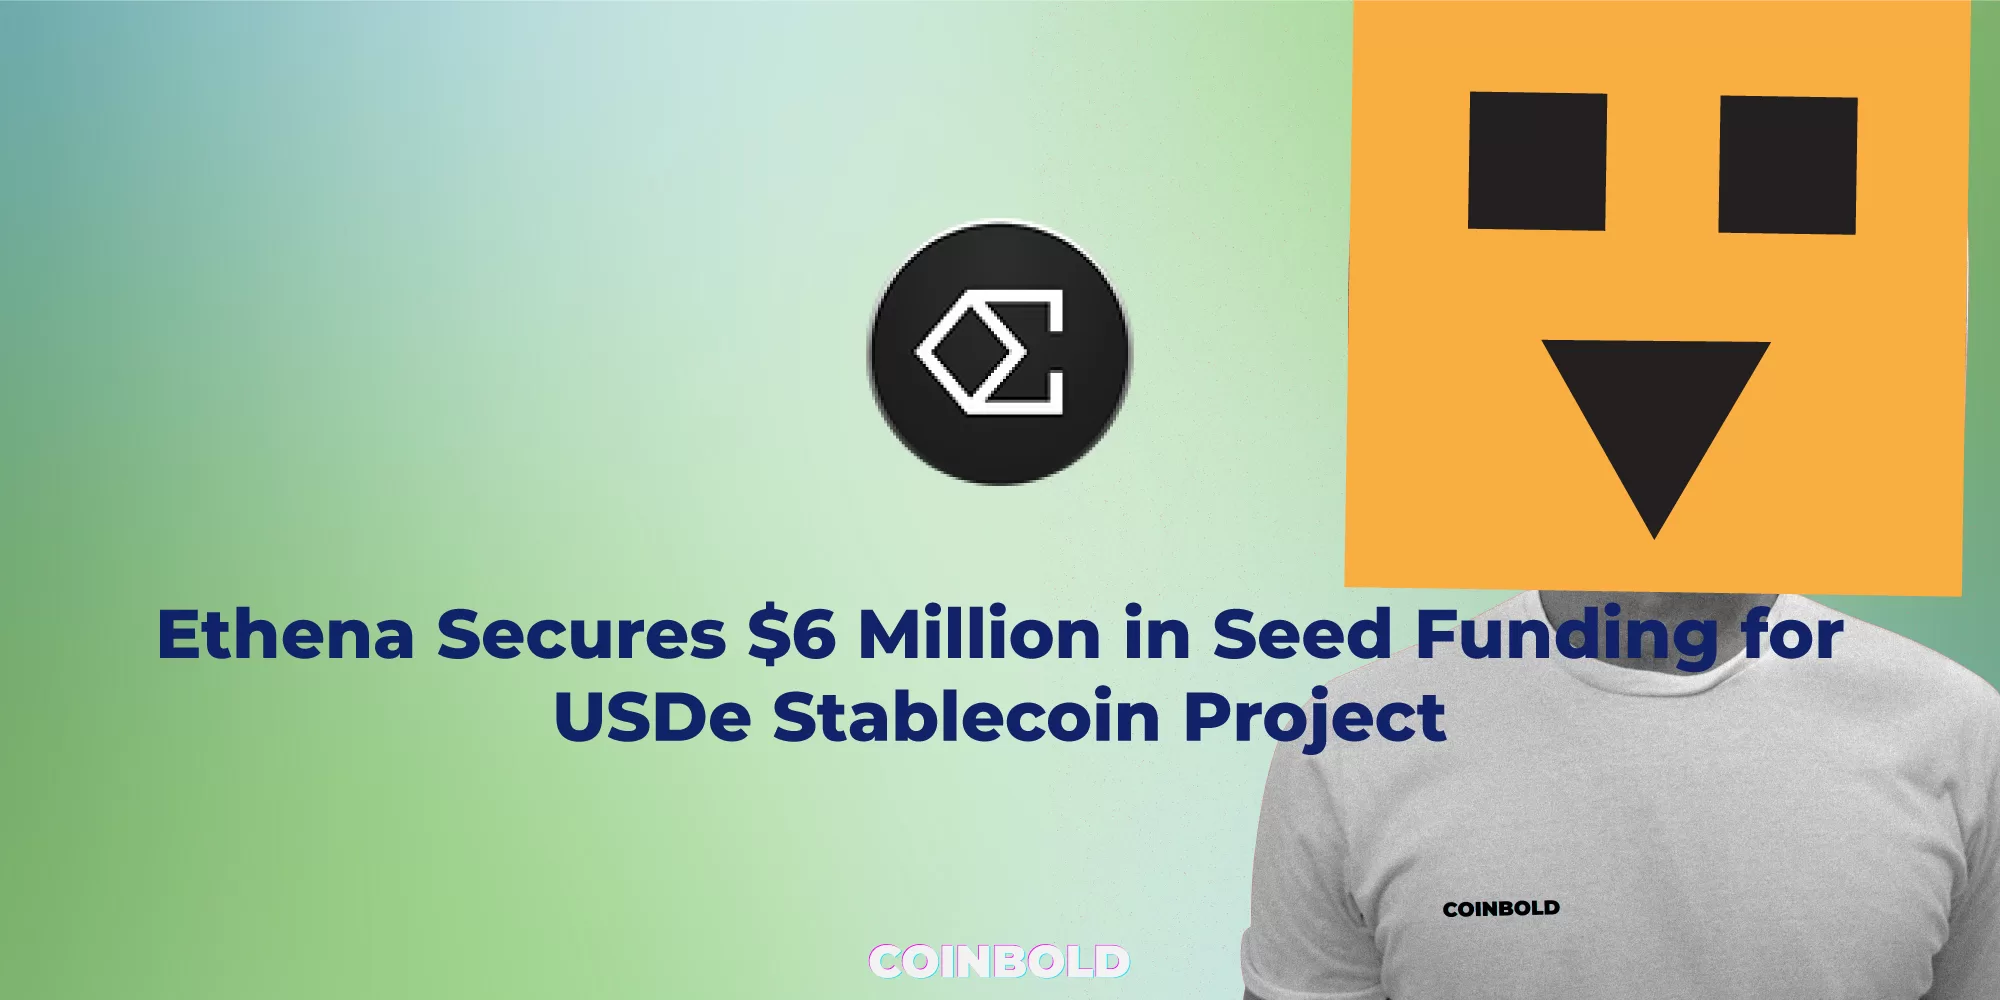 Ethena Secures $6 Million in Seed Funding for USDe Stablecoin Project